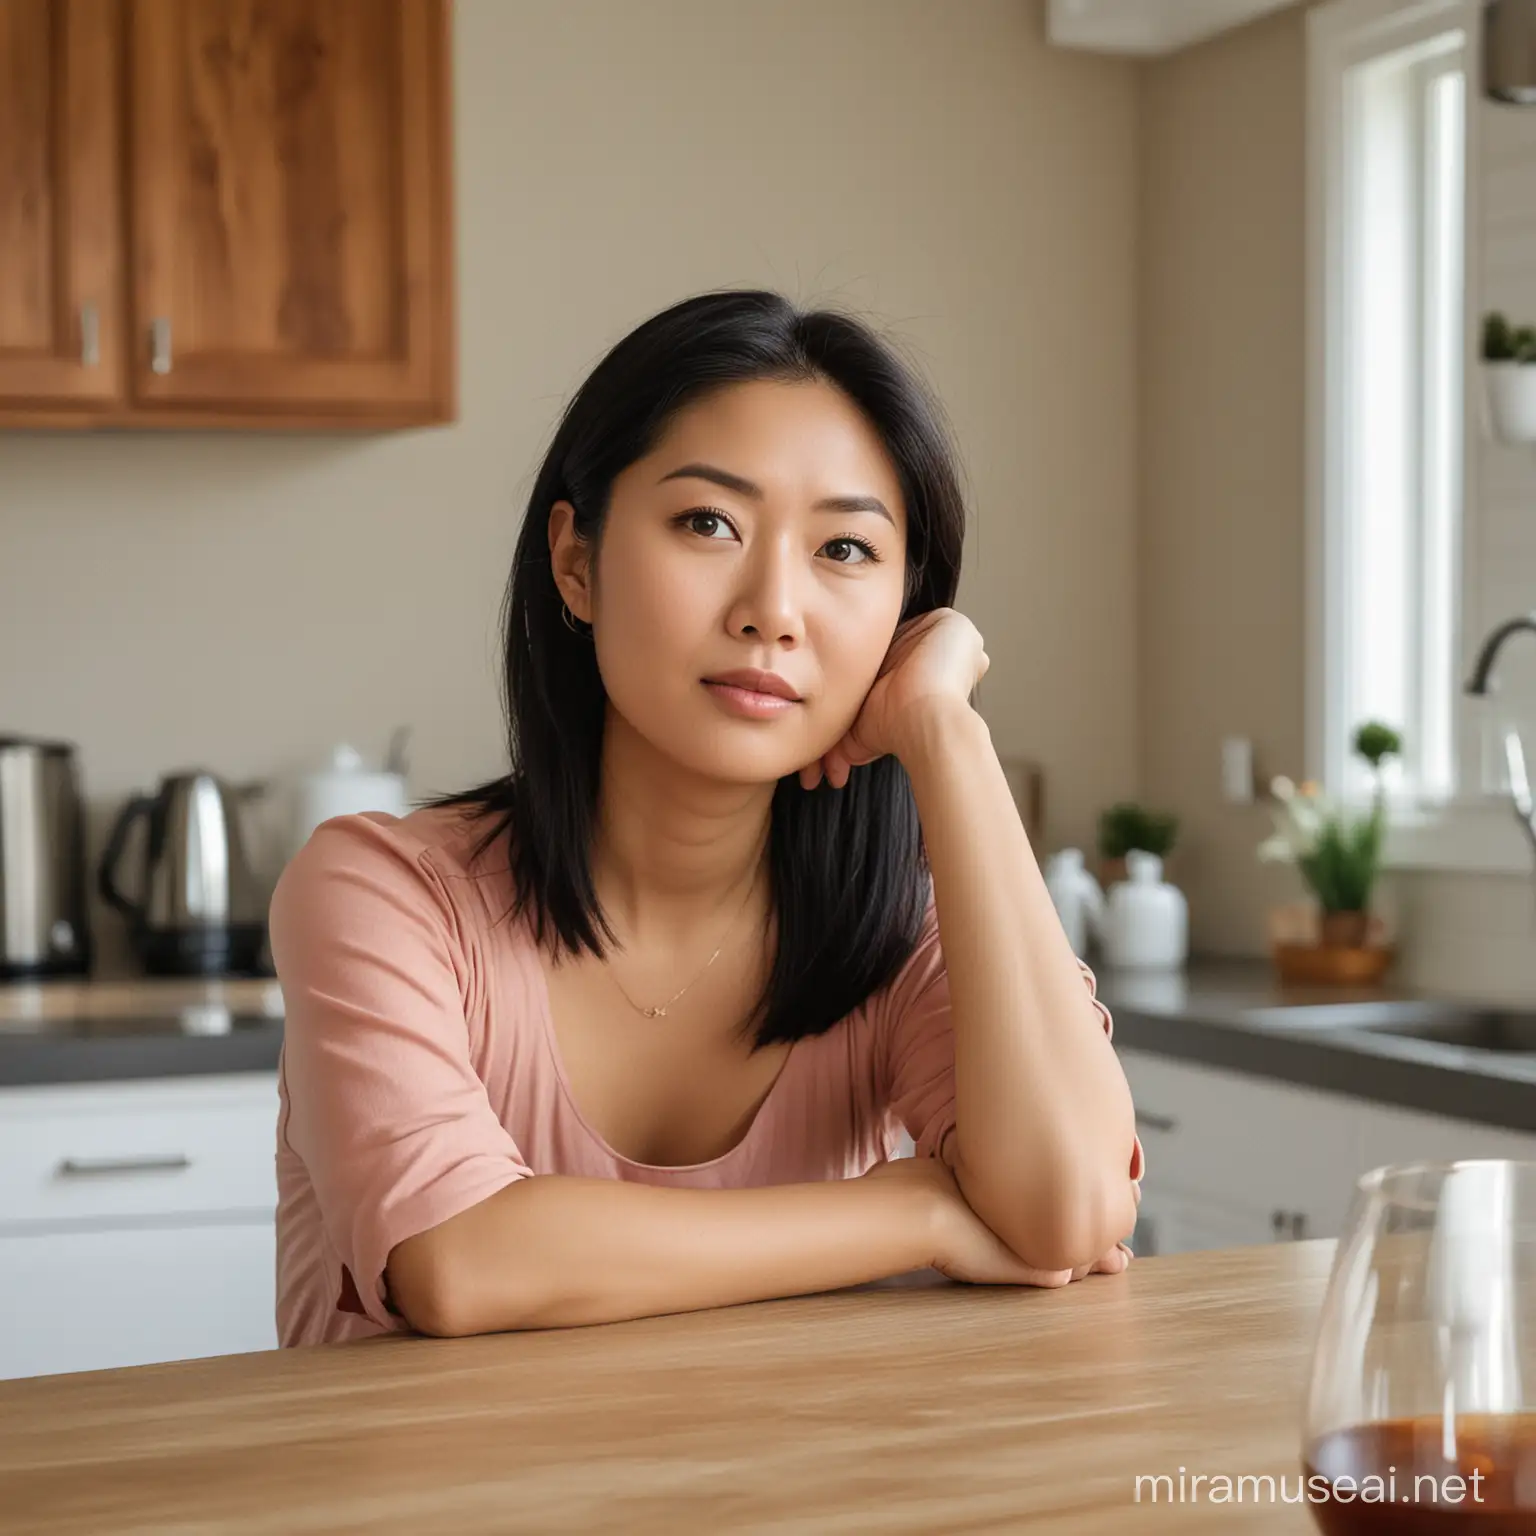 Contemplative Asian Woman at Kitchen Table Ready for Change